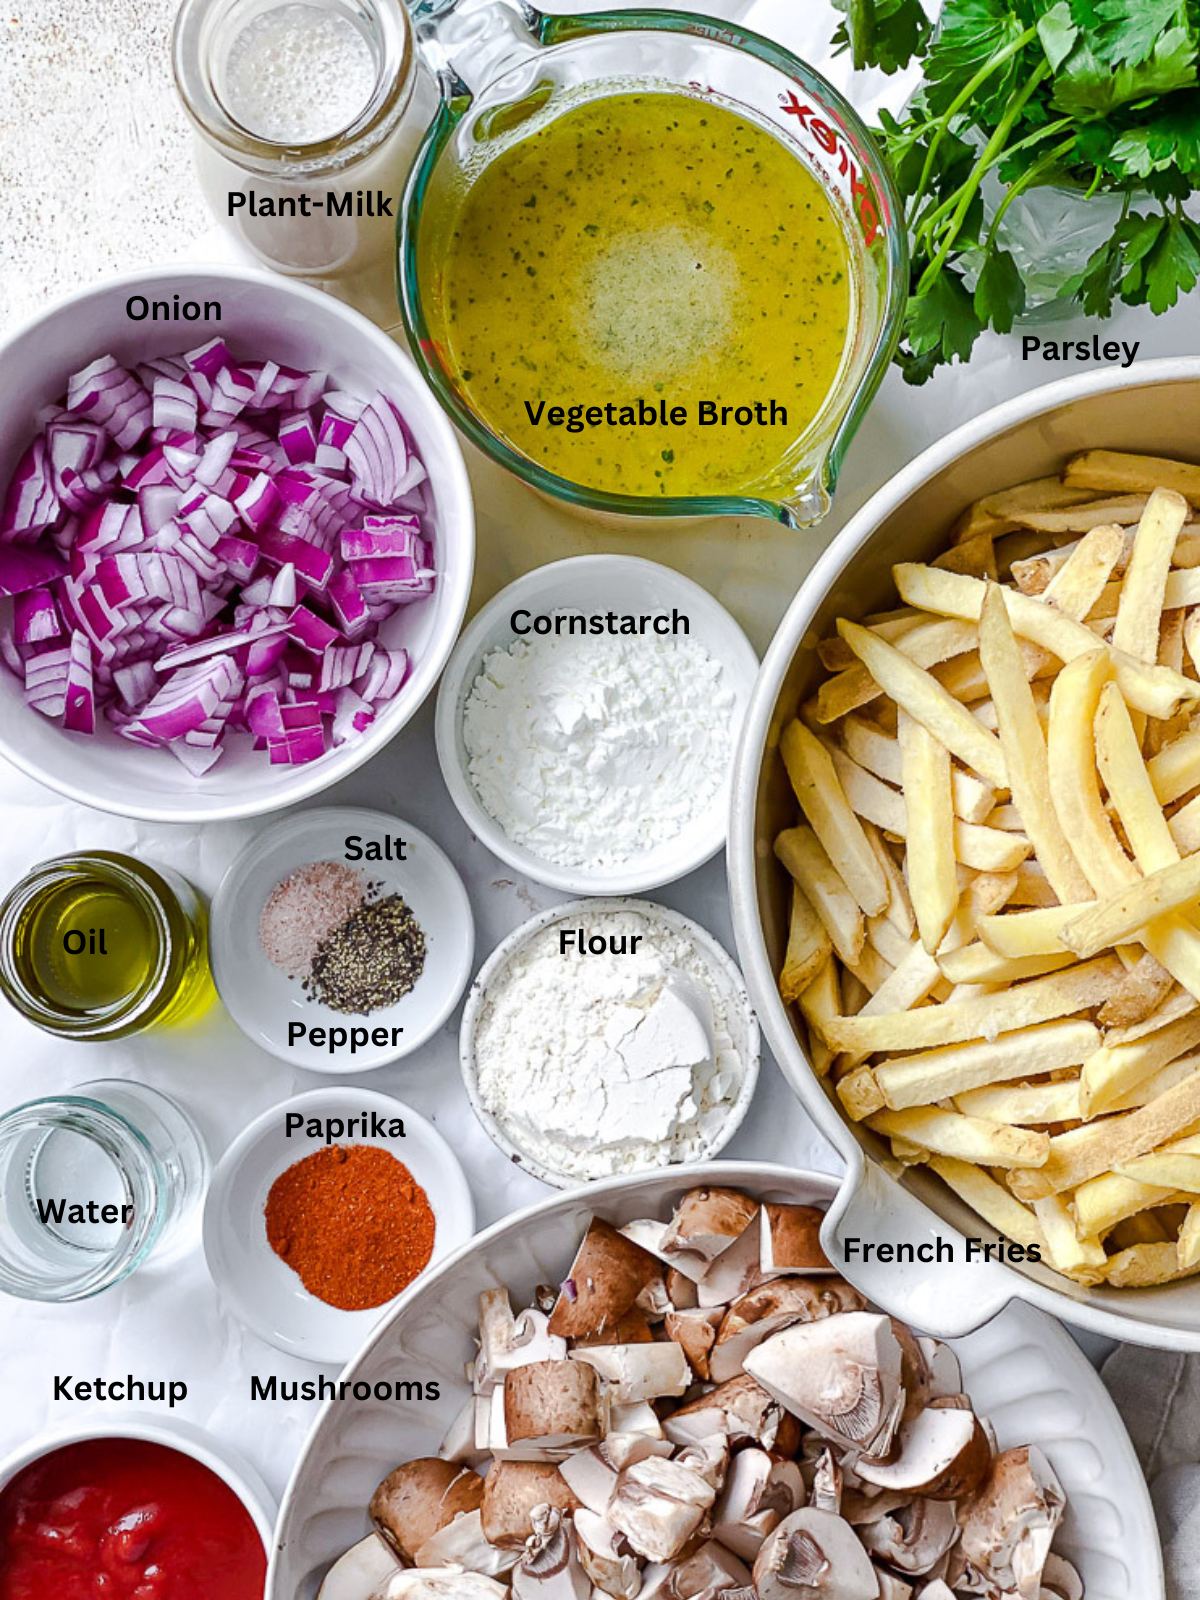 ingredients for Vegan Poutine measured out on a white surface